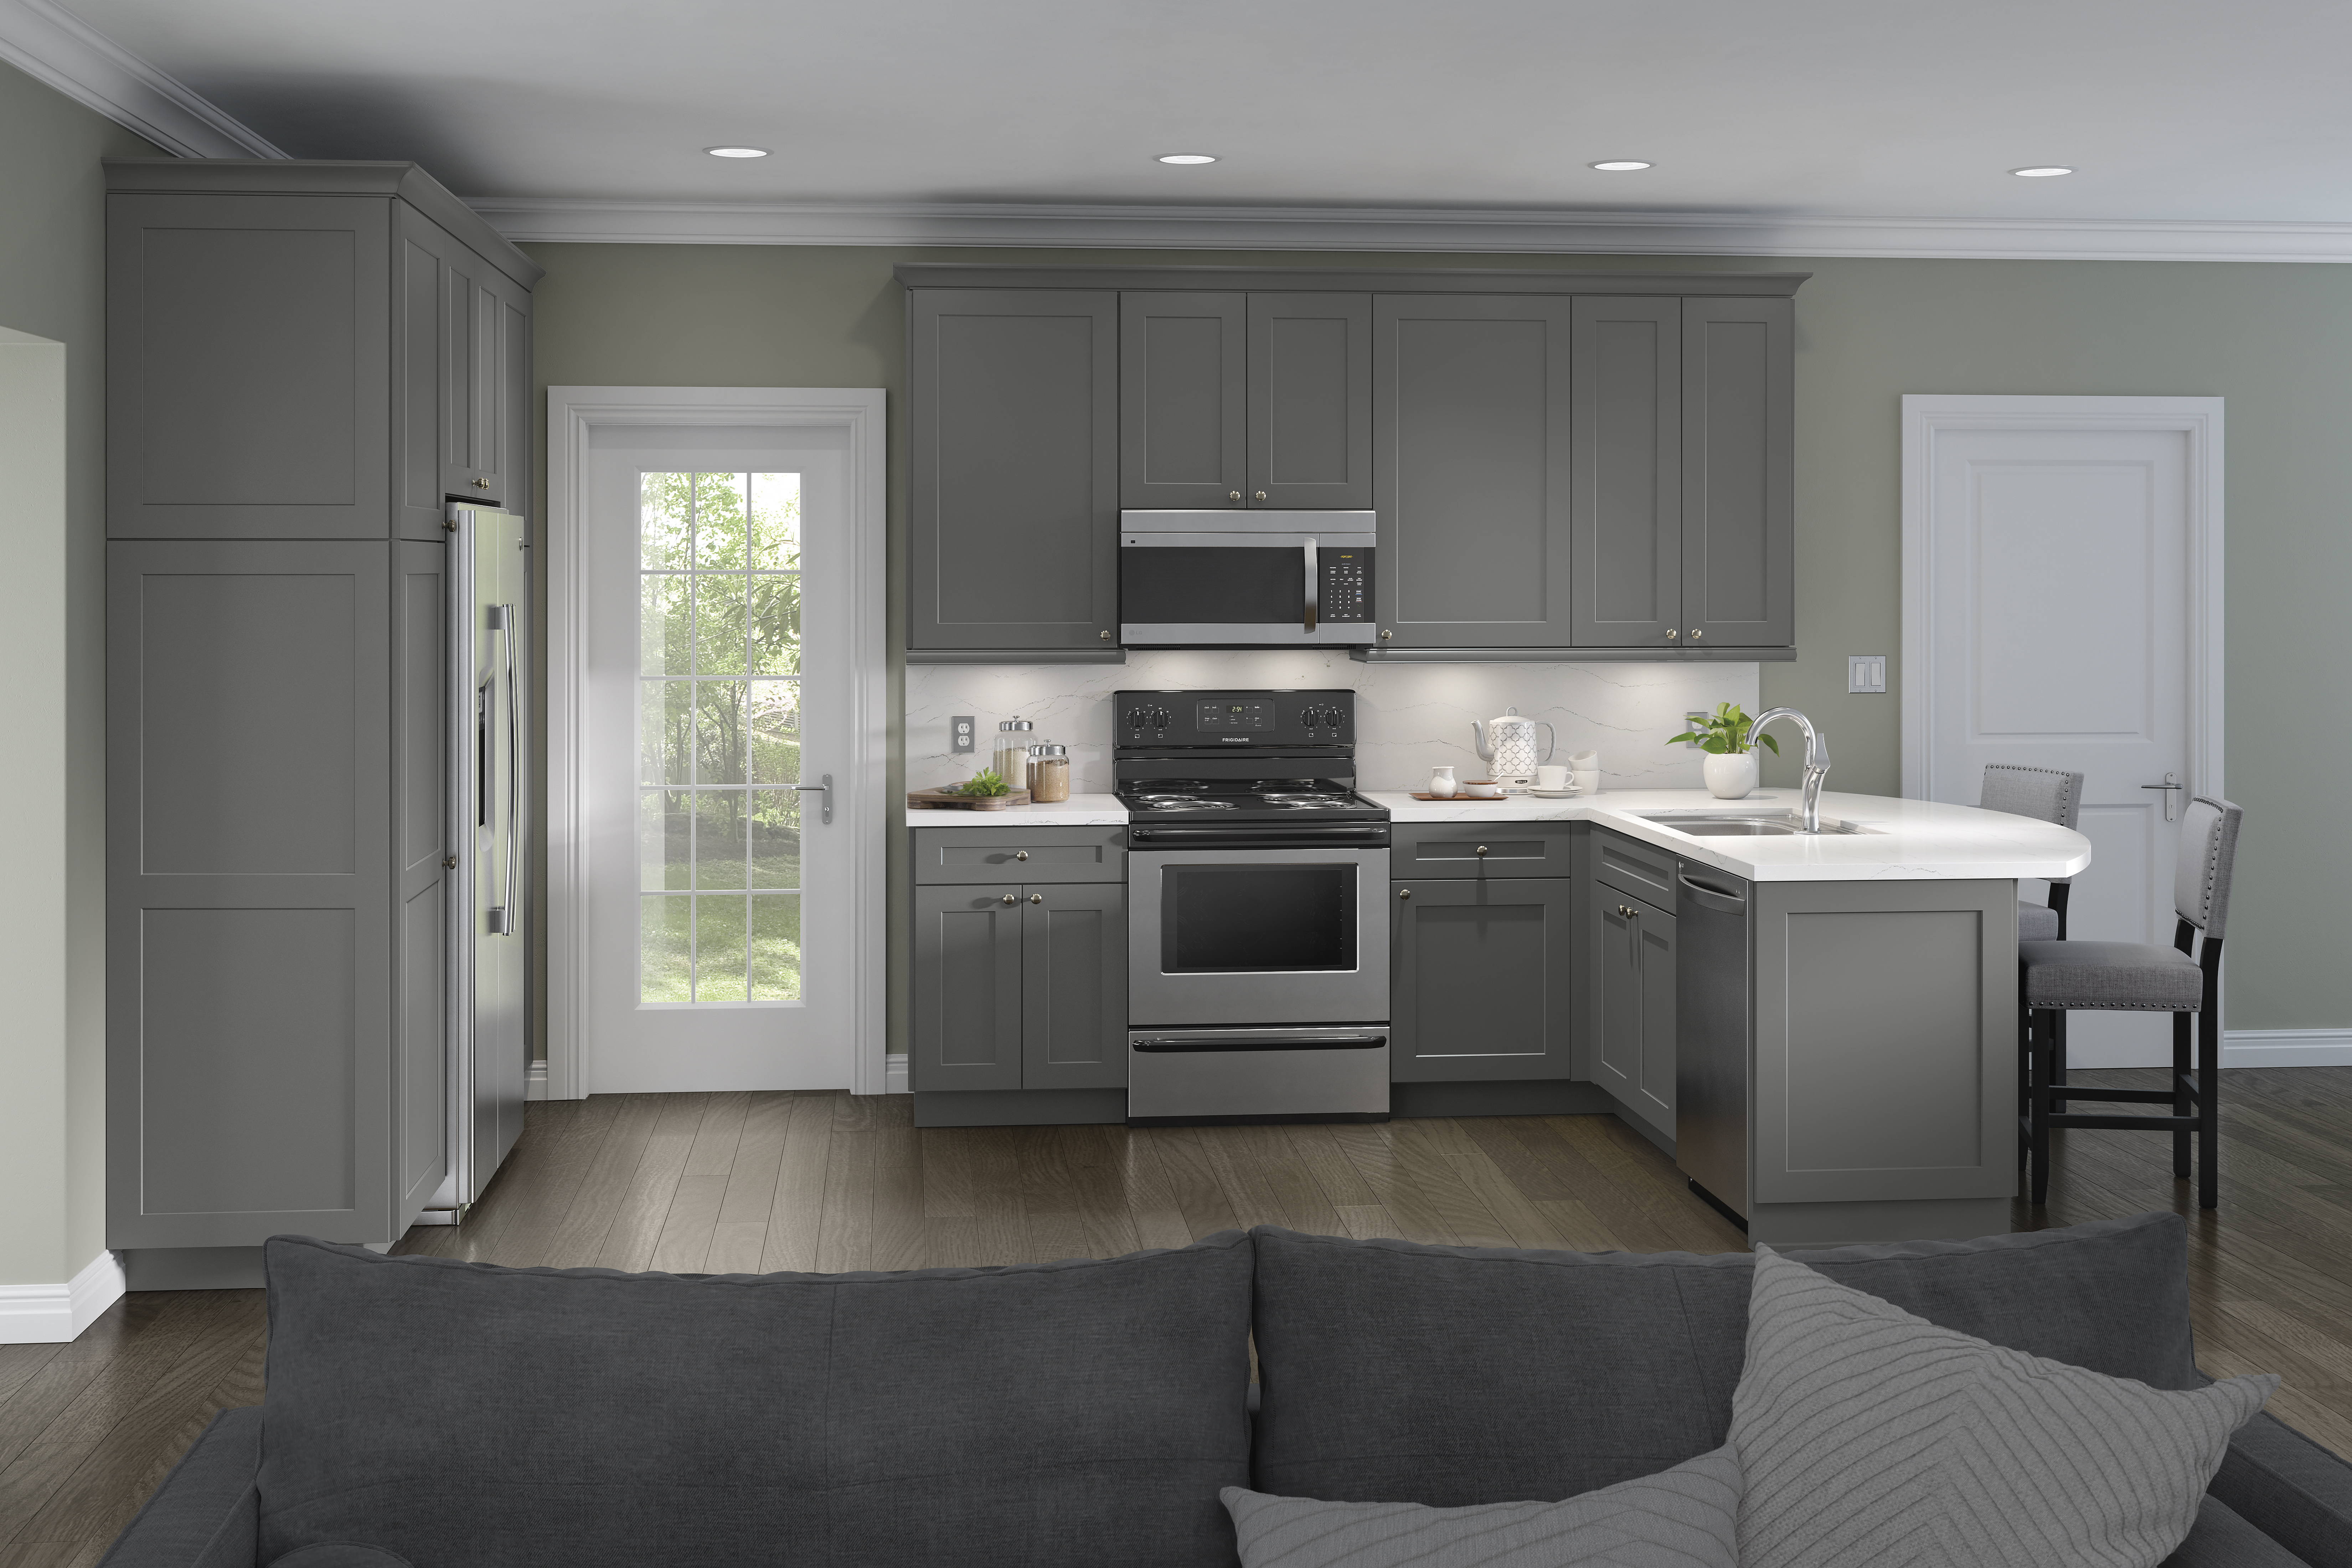 This new kitchen has a classic feel with strong brown cabinets and high quality accessories